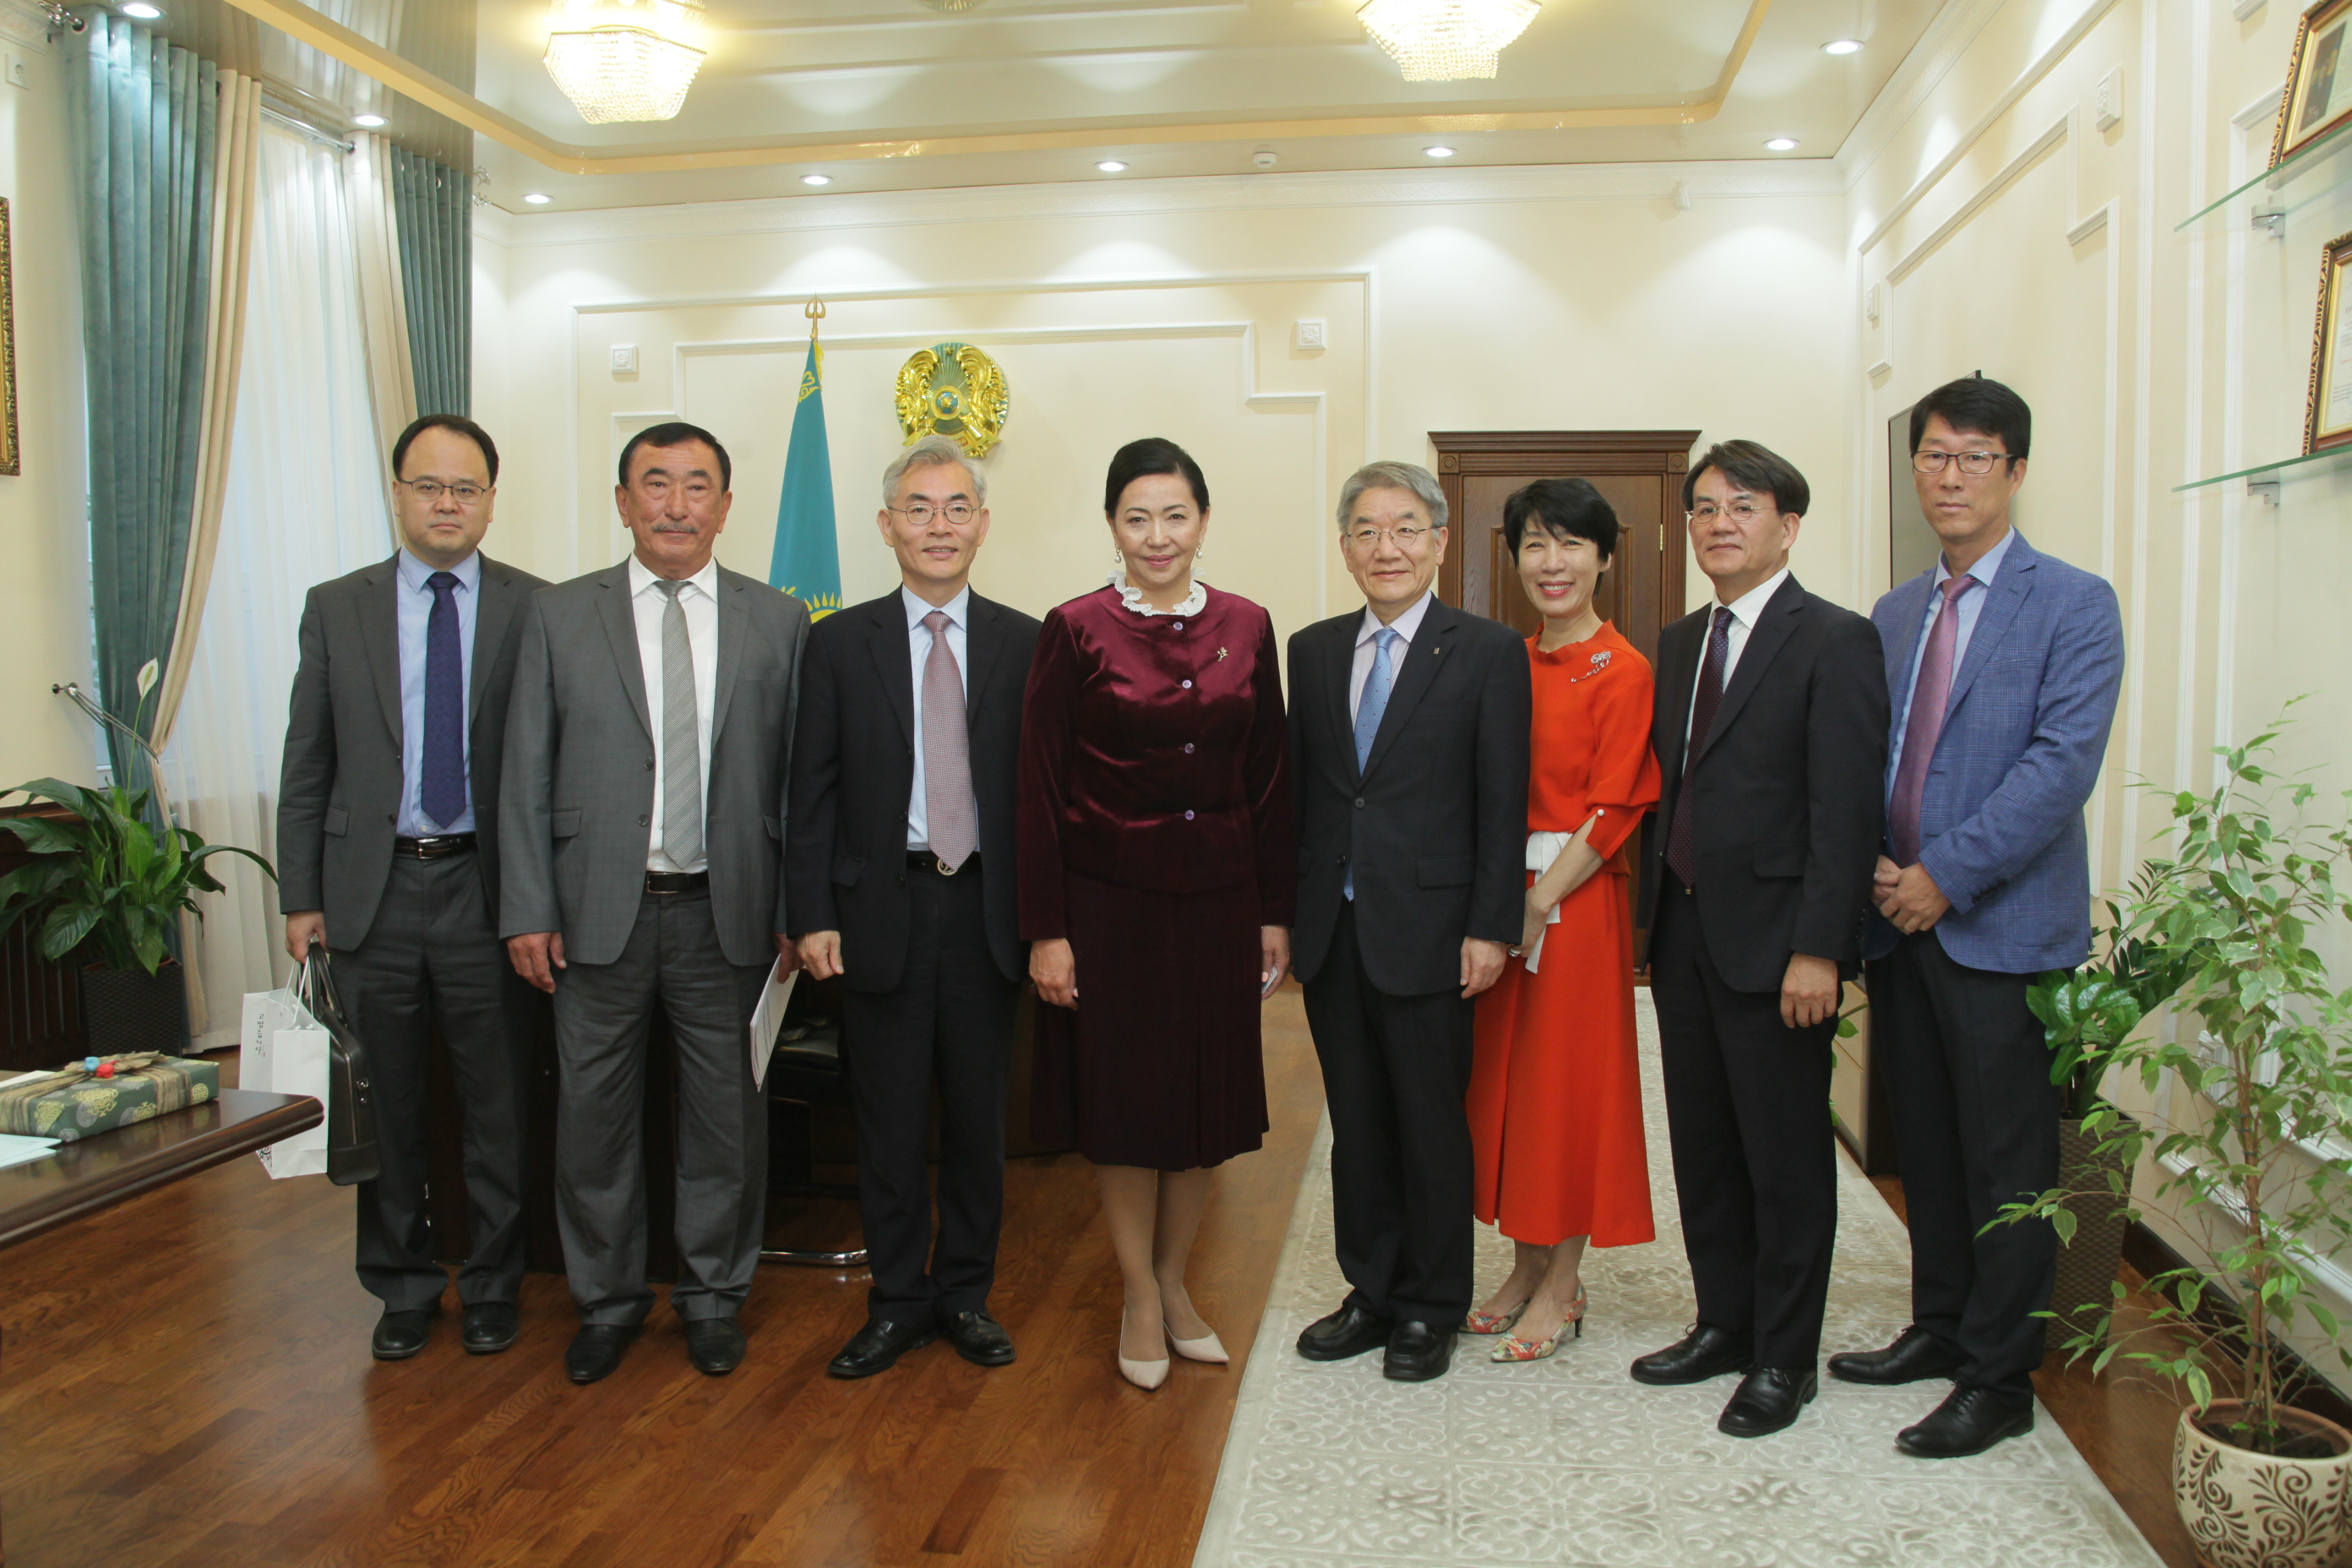 The opening of the Korean Educational Center &quot;Sejong&quot; in M. Auezov SKSU with the participation of Ambassador Extraordinary and Plenipotentiary of the Republic of Korea to the Republic of Kazakhstan Kim Desik